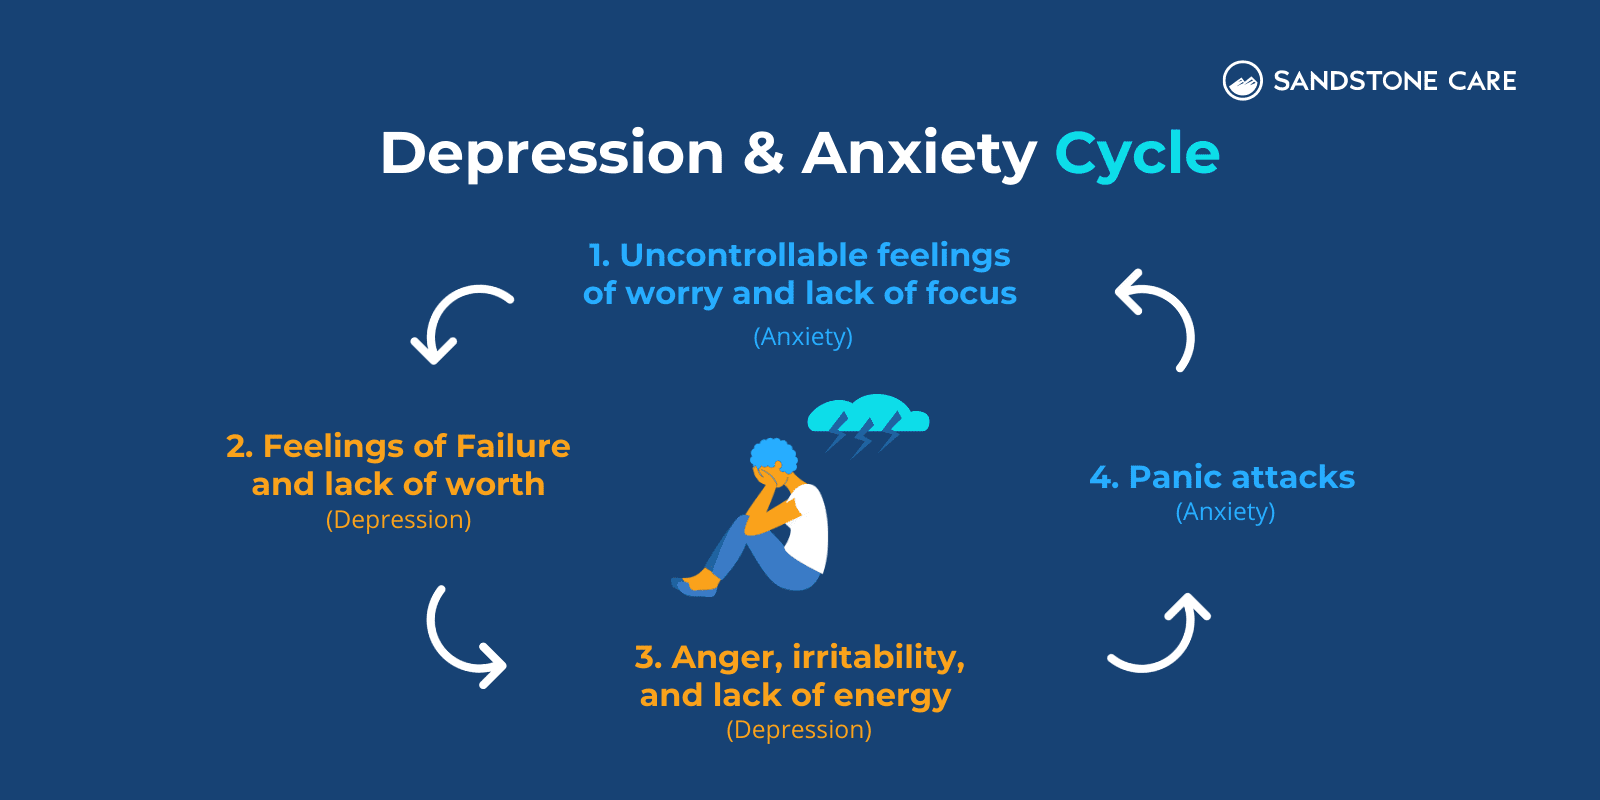 Depression & Anxiety Cycle illustrated with relevant images and infographic